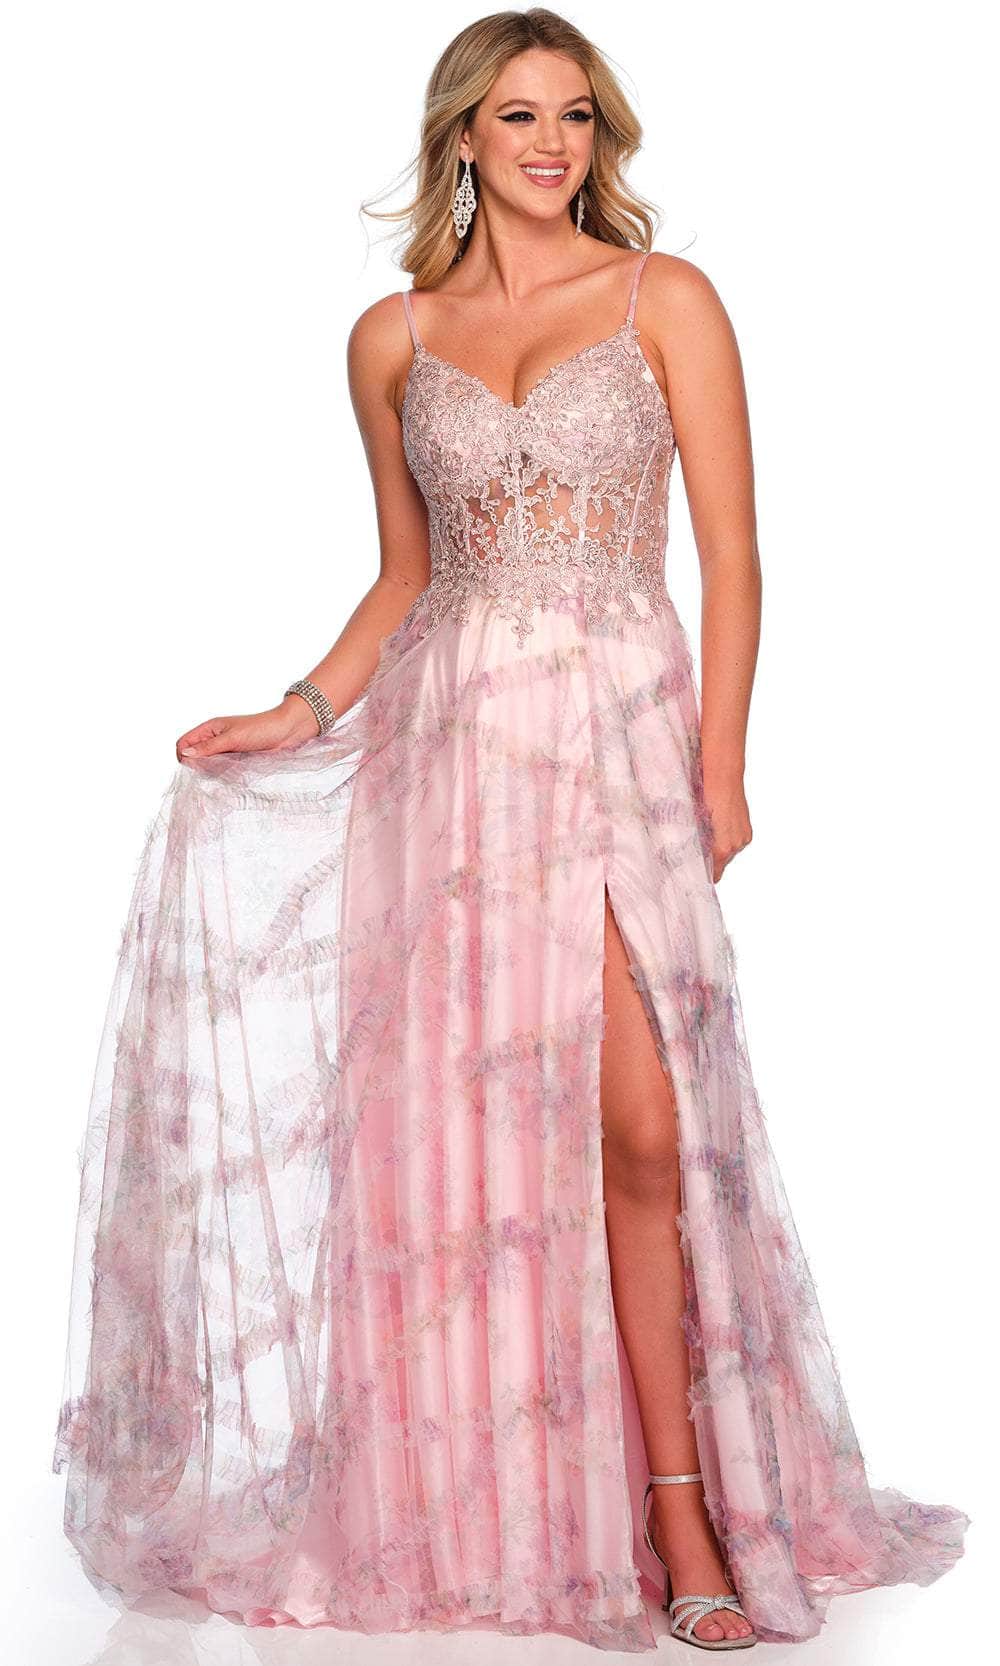 Image of Dave & Johnny 11428 - Lace Applique Sleeveless Prom Gown